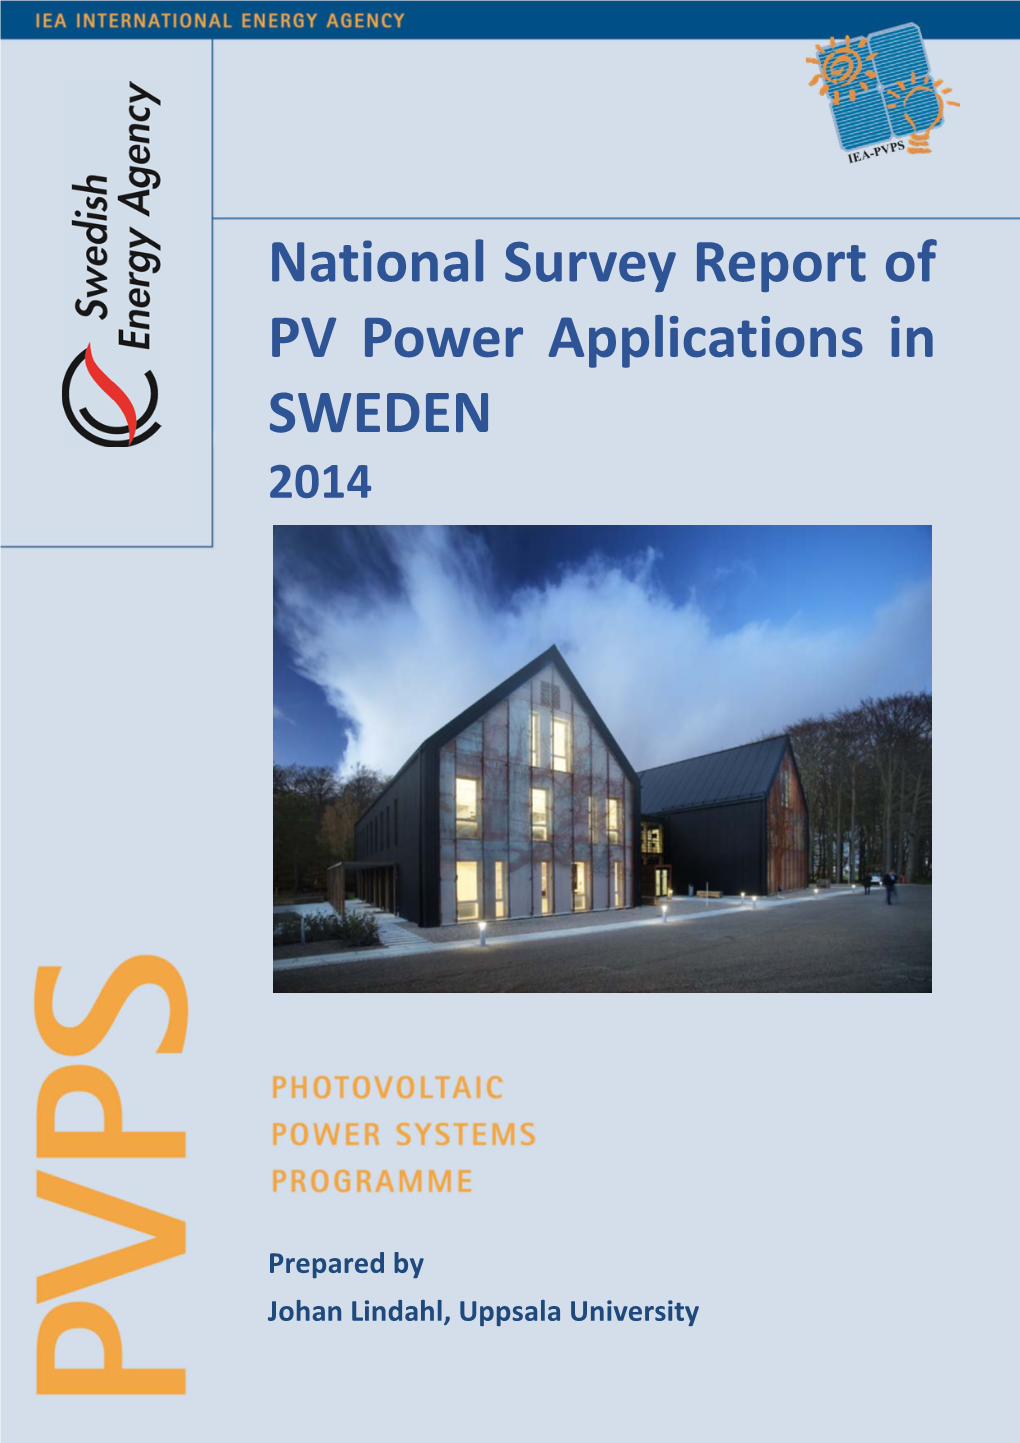 National Survey Report of PV Power Applications in SWEDEN